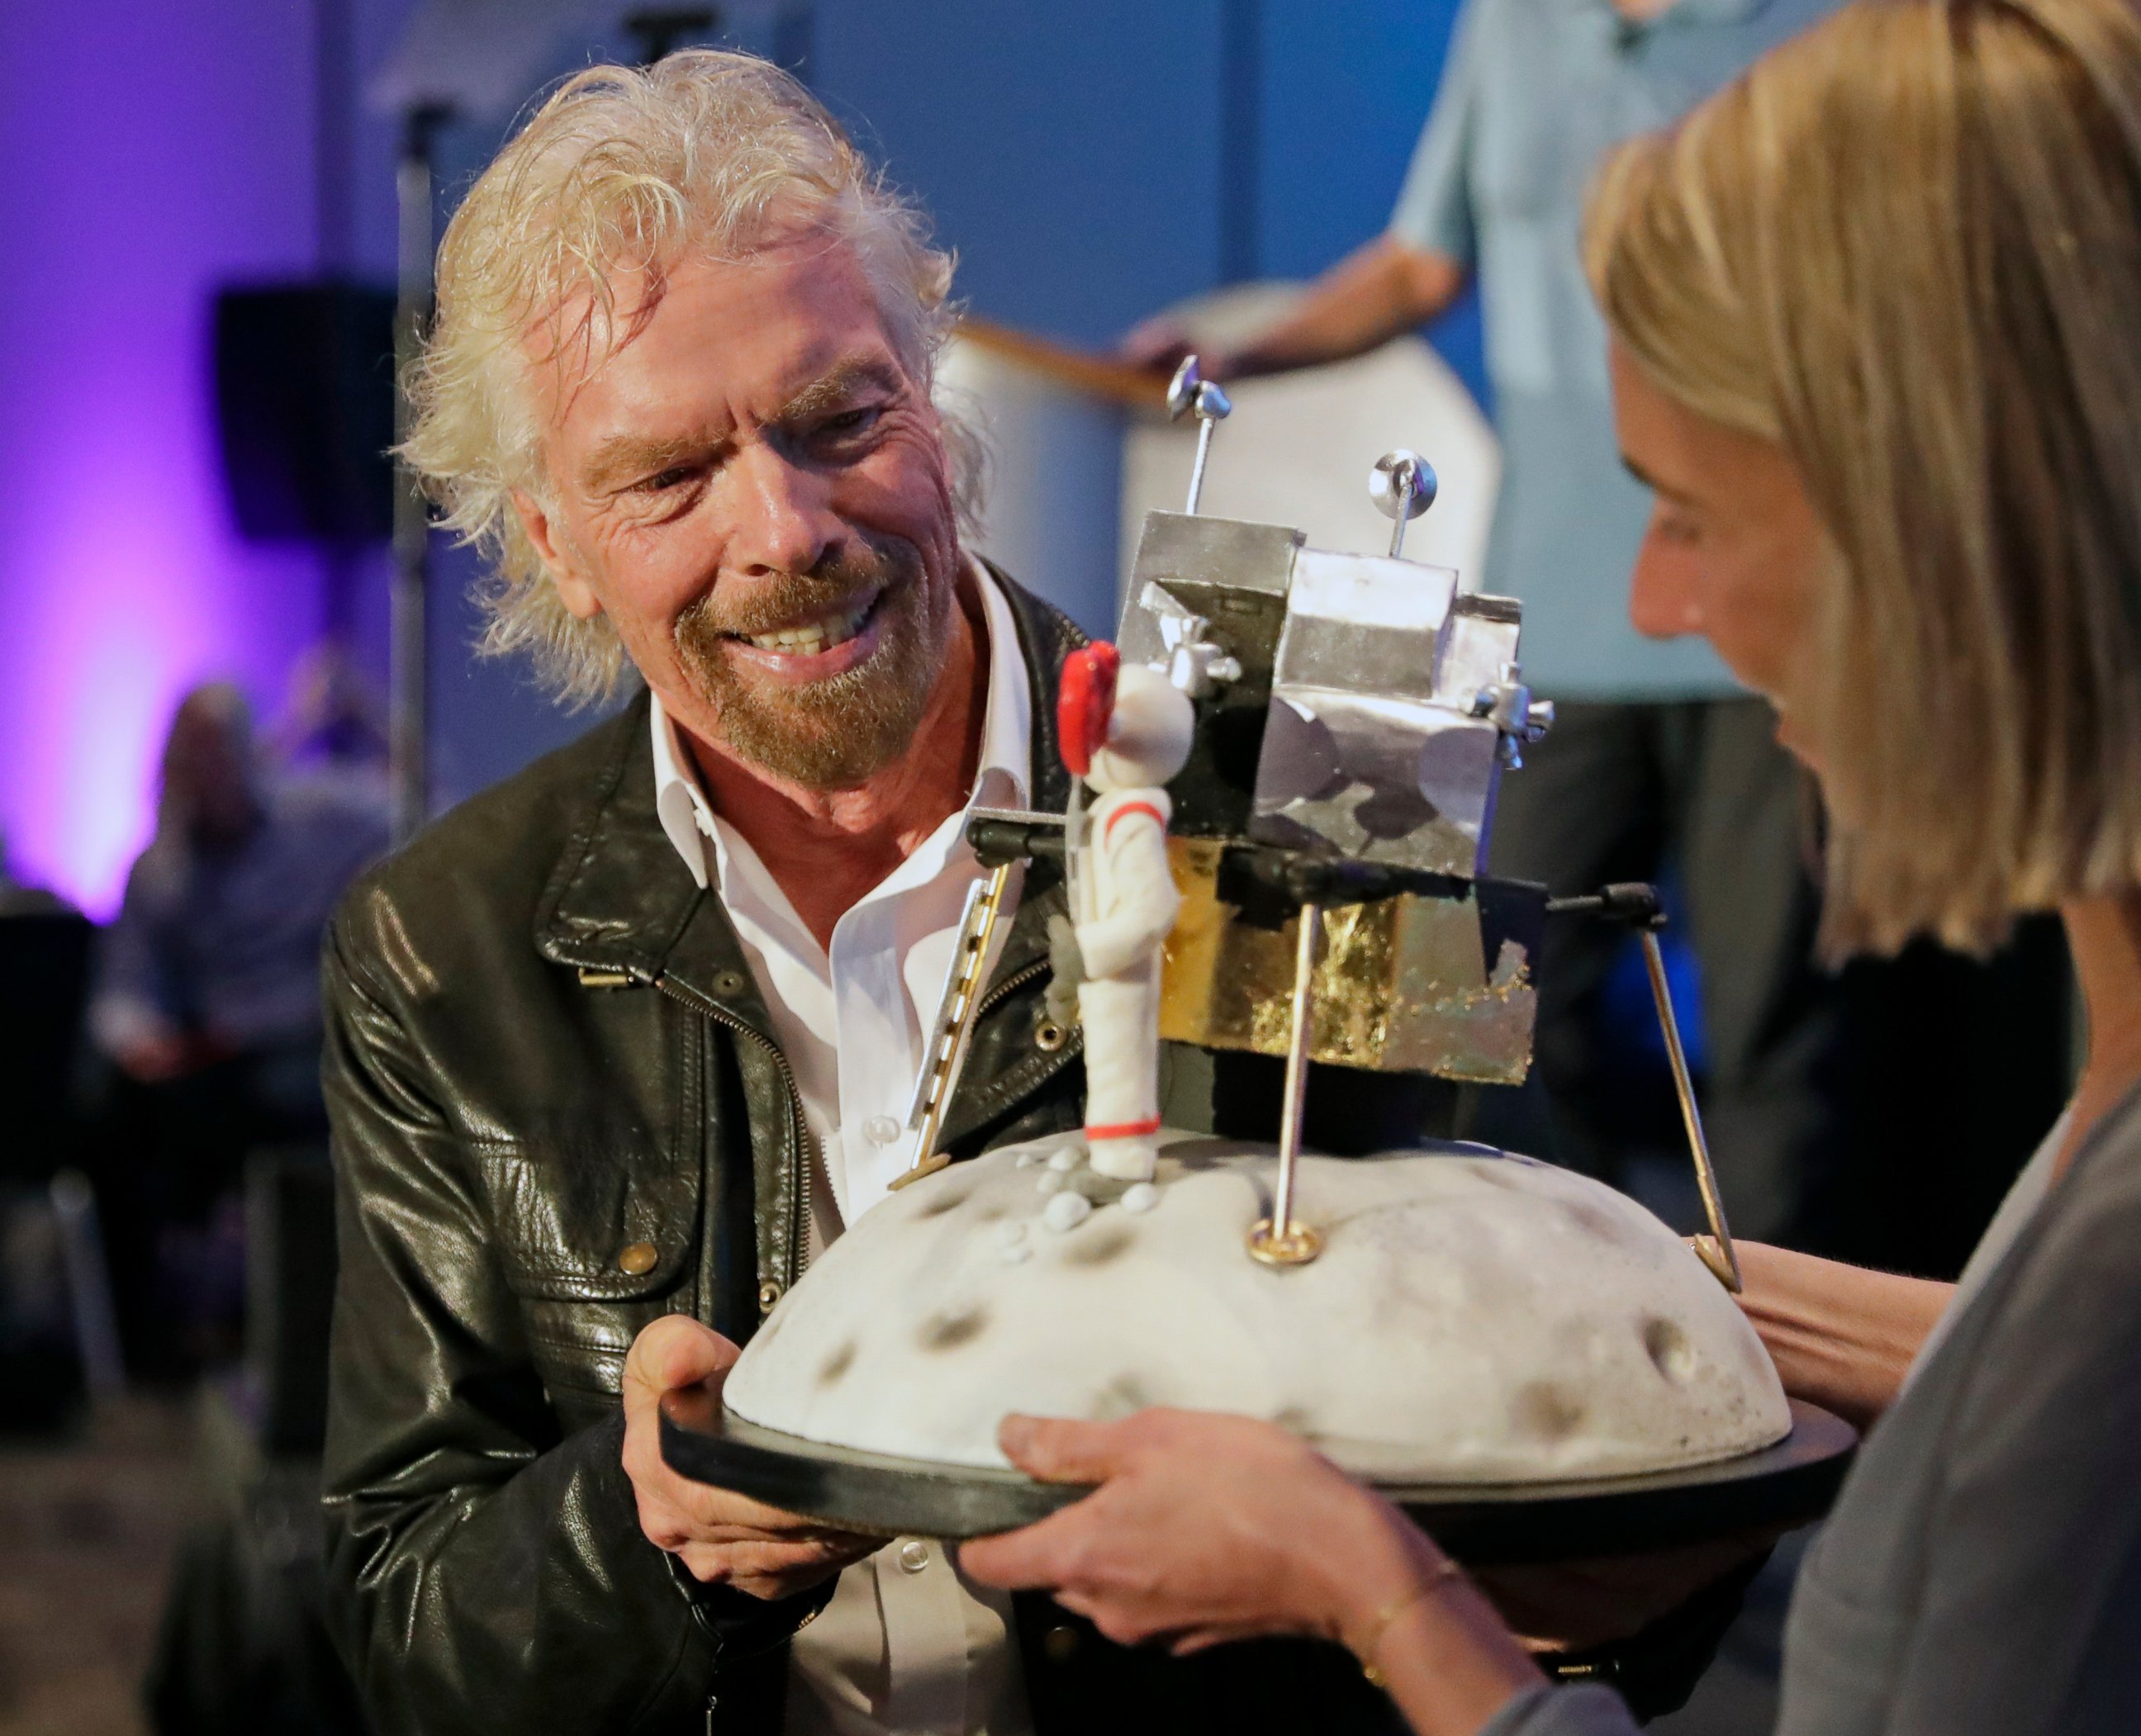 PHOTO: Richard Branson is presented with a space-themed cake during a lunch attended by Virgin Galactic ticket holders, to mark his 69th birthday and in recognition of the Apollo 11 moon landing anniversary Thursday, July 18, 2019, in Cape Canaveral, Fla.